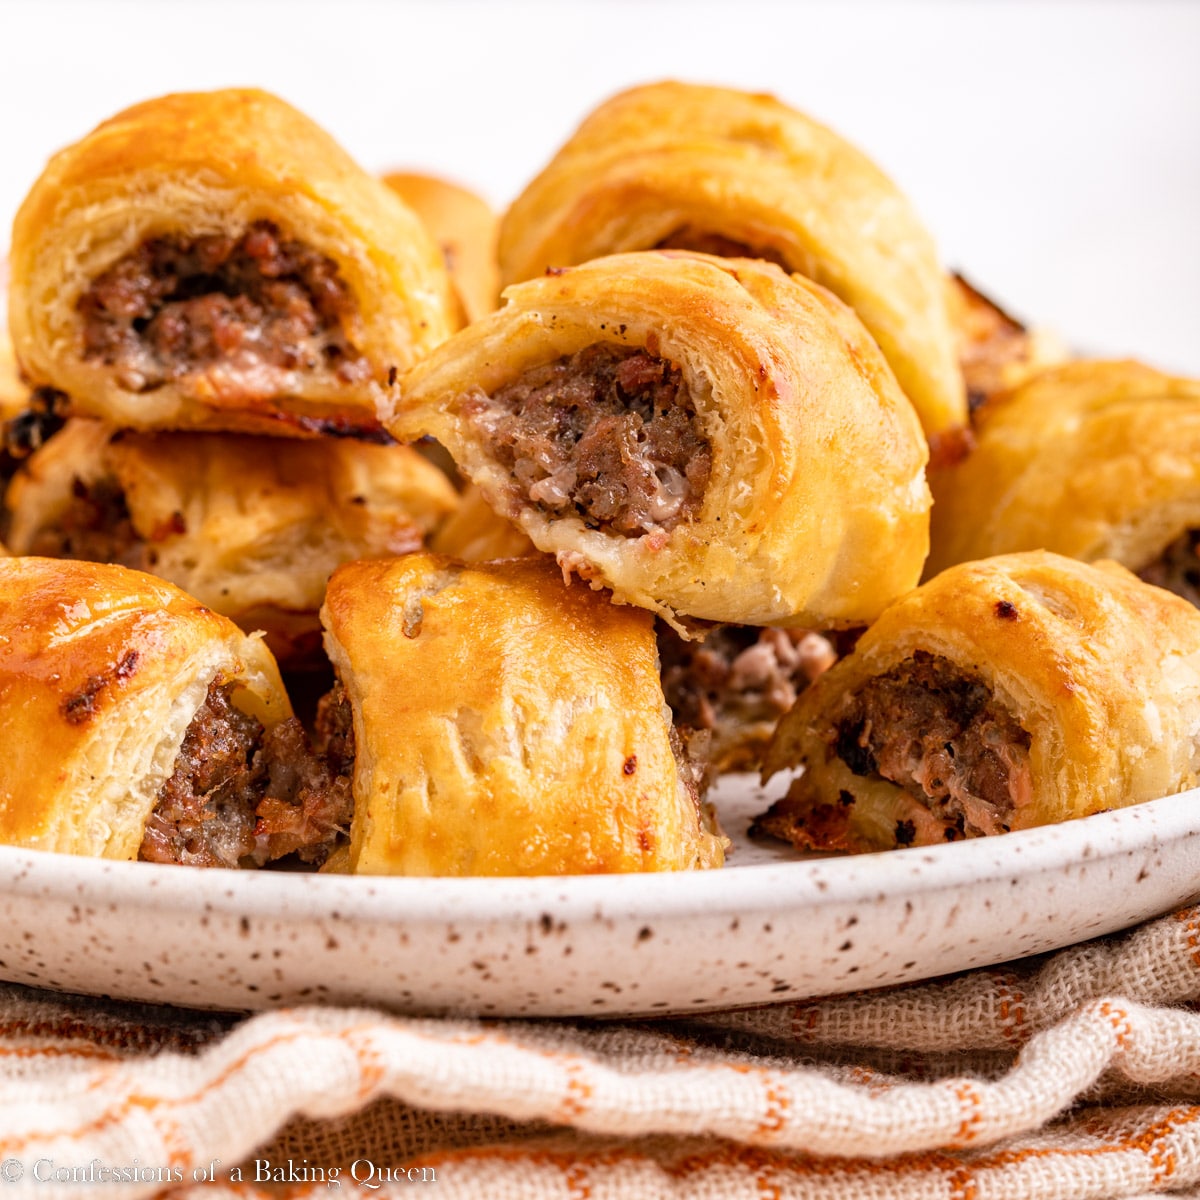 Sausage rolls on a plate.